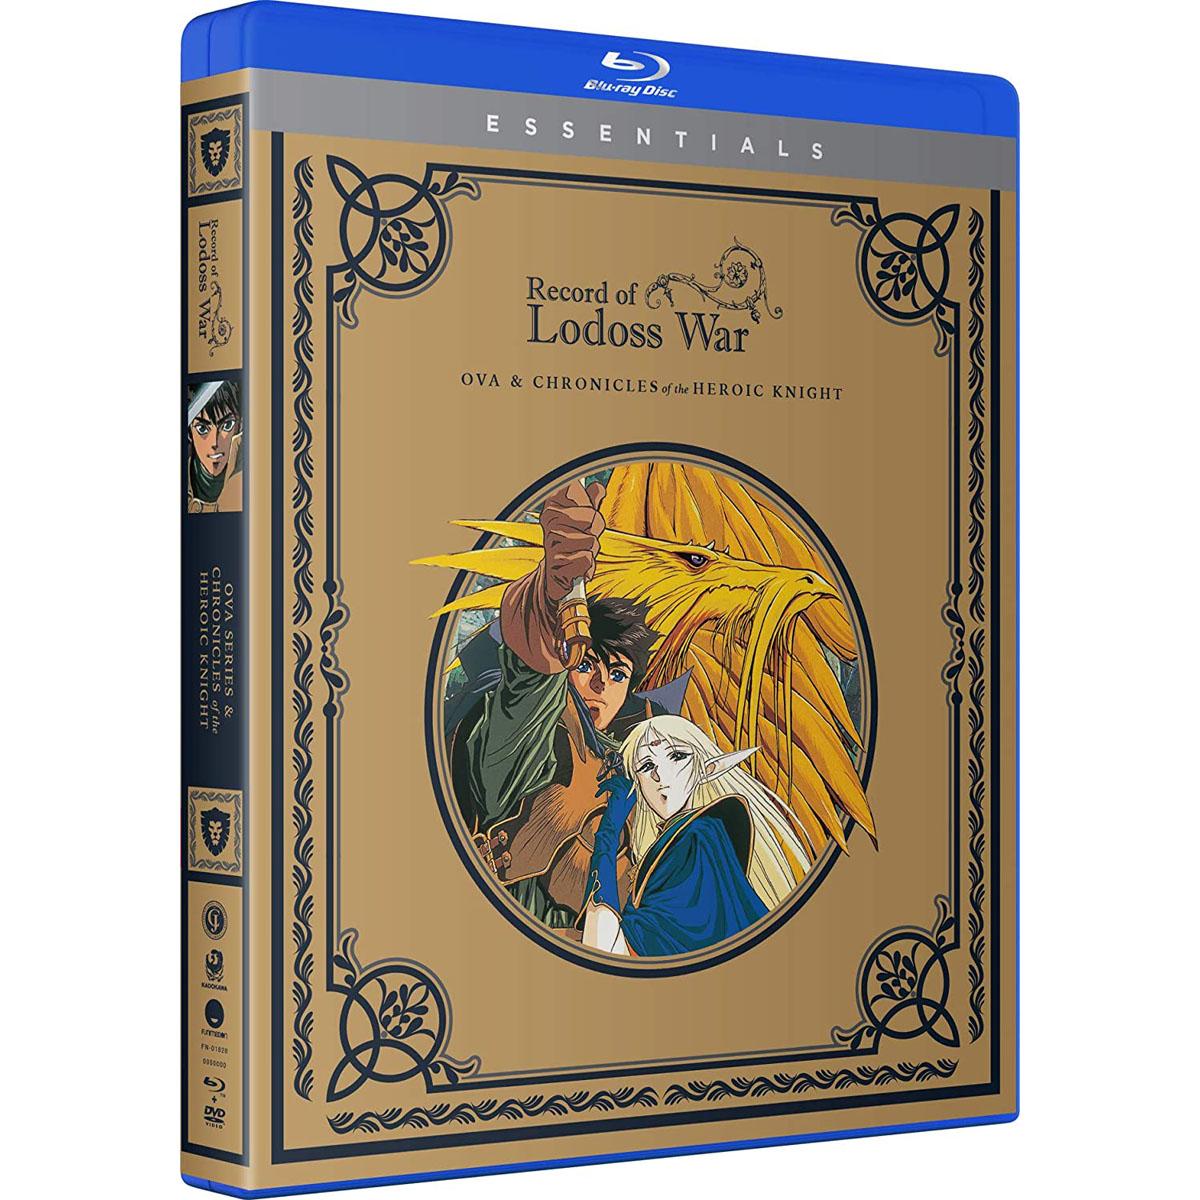 Record of Lodoss War OVA and Chronicles of the Heroic Knight Blu-ray for $15.19